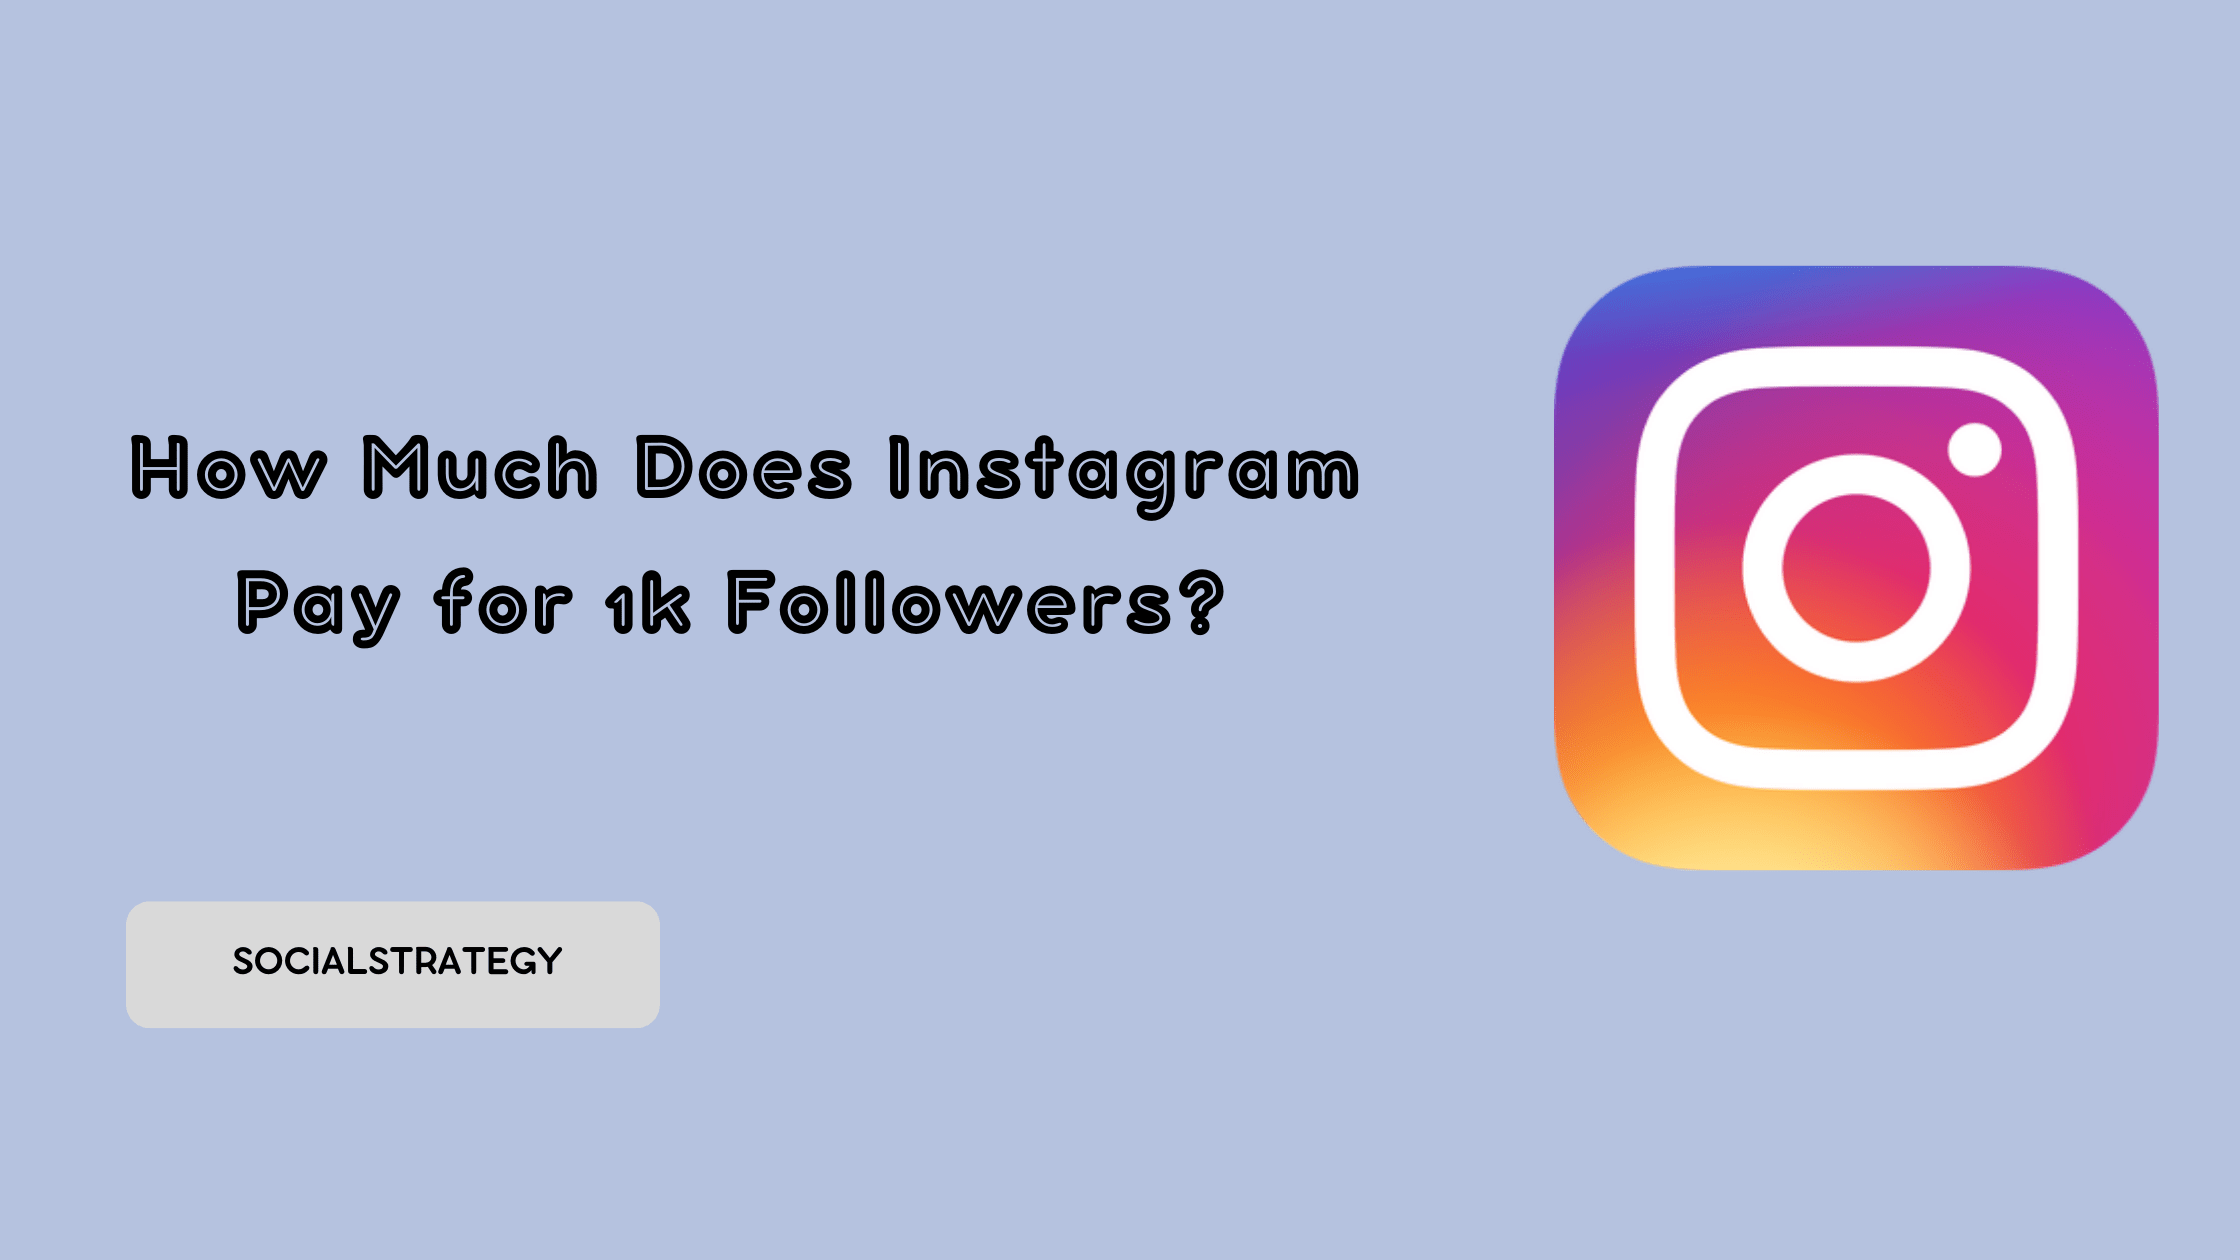 How Much Does Instagram Pay For K Followers